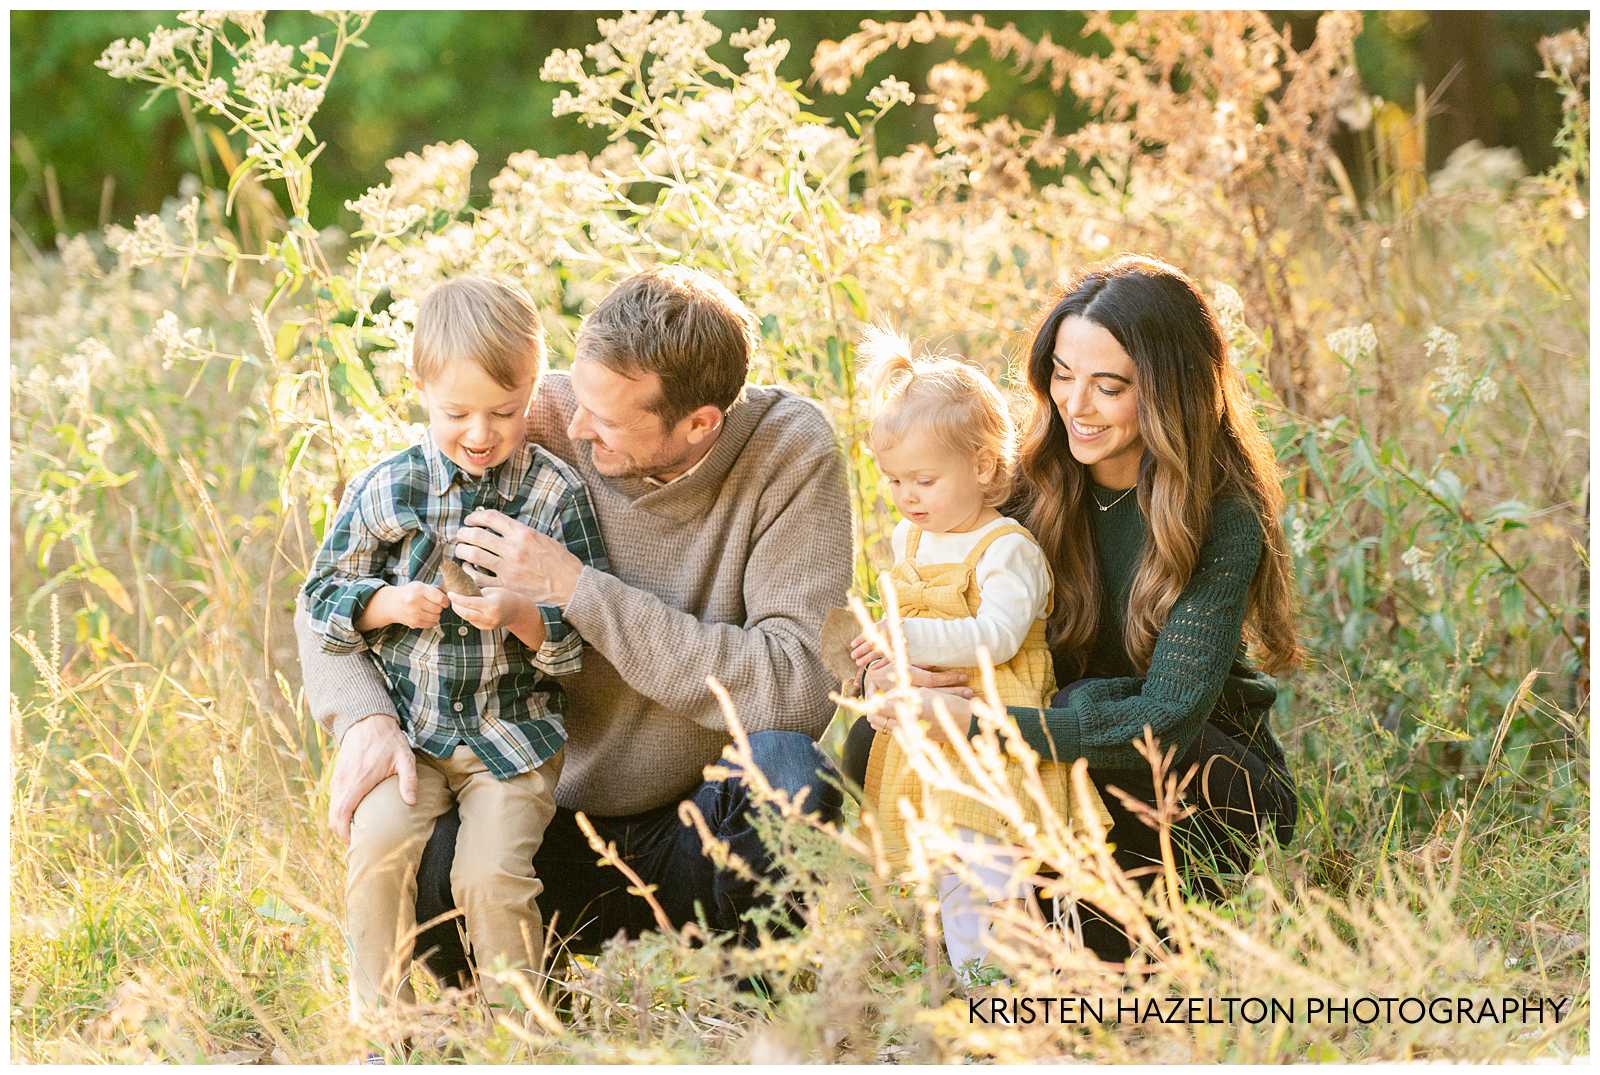 Mom and Dad playing with their toddler son and daughter in a field of yellow grass